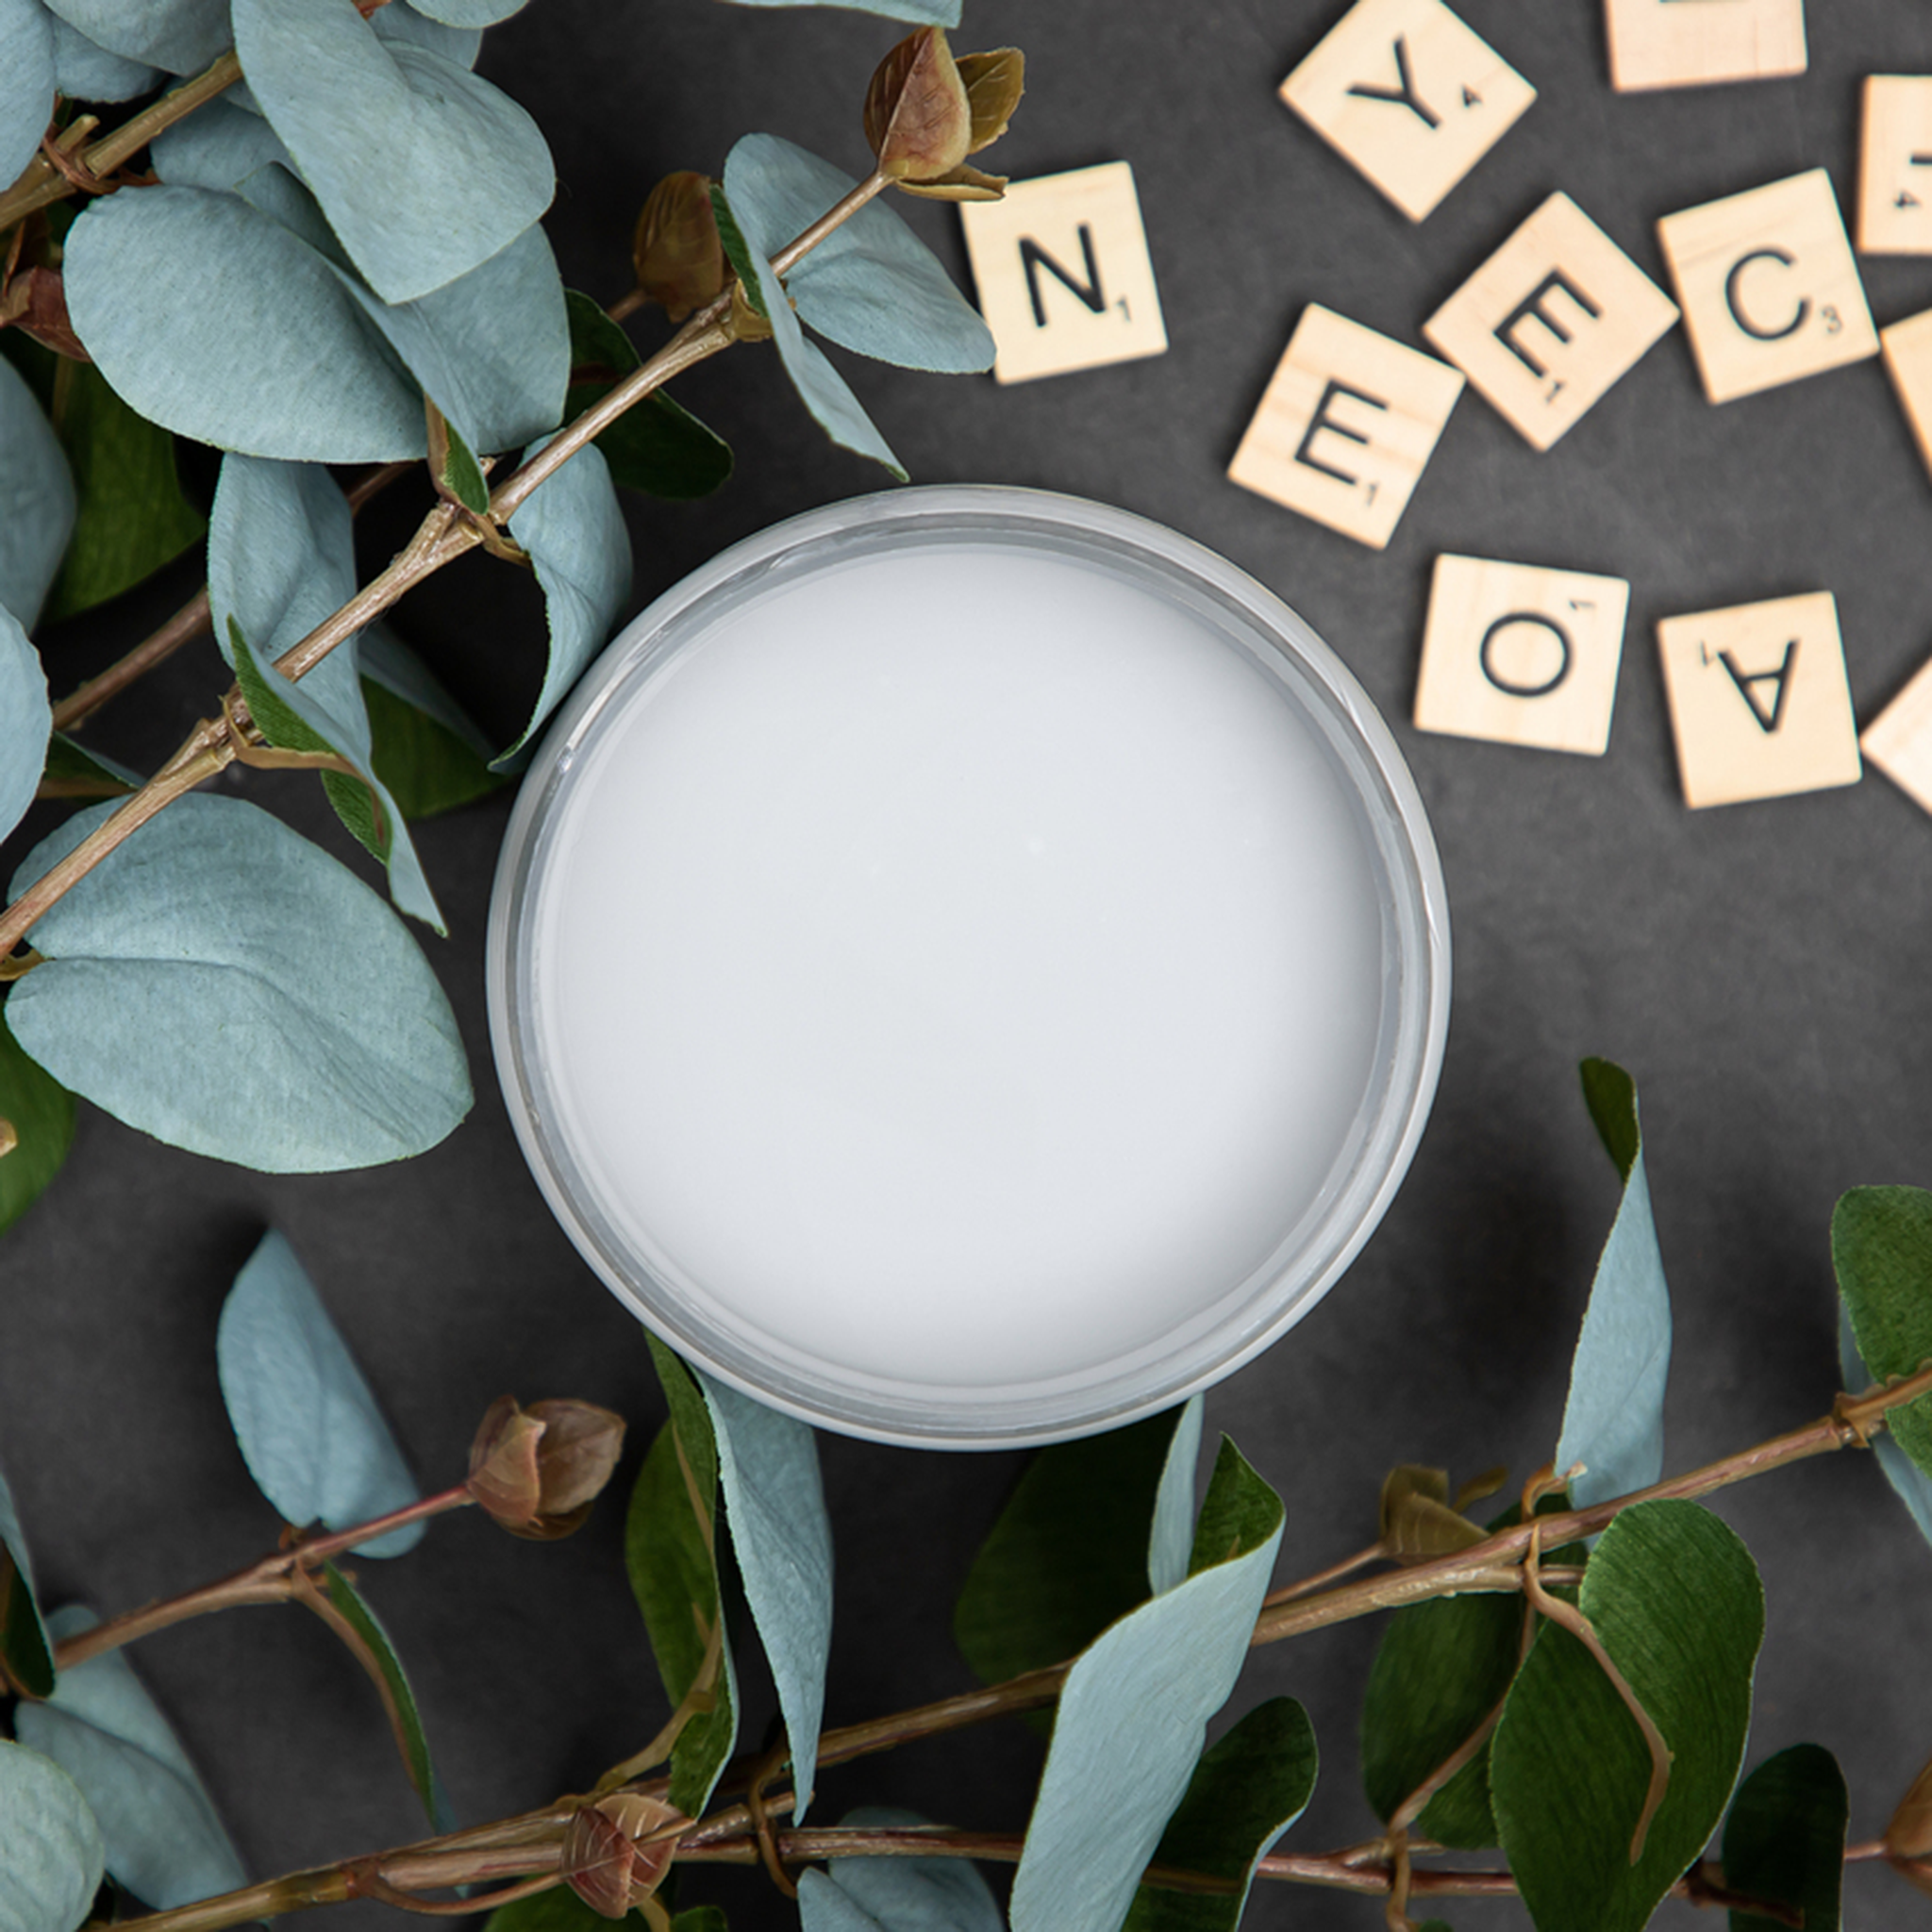 An arial view of an open container of Dixie Belle Paint Company’s Manatee Gray Chalk Mineral Paint is surrounded by silk eucalyptus leaves and Scrabble letters.